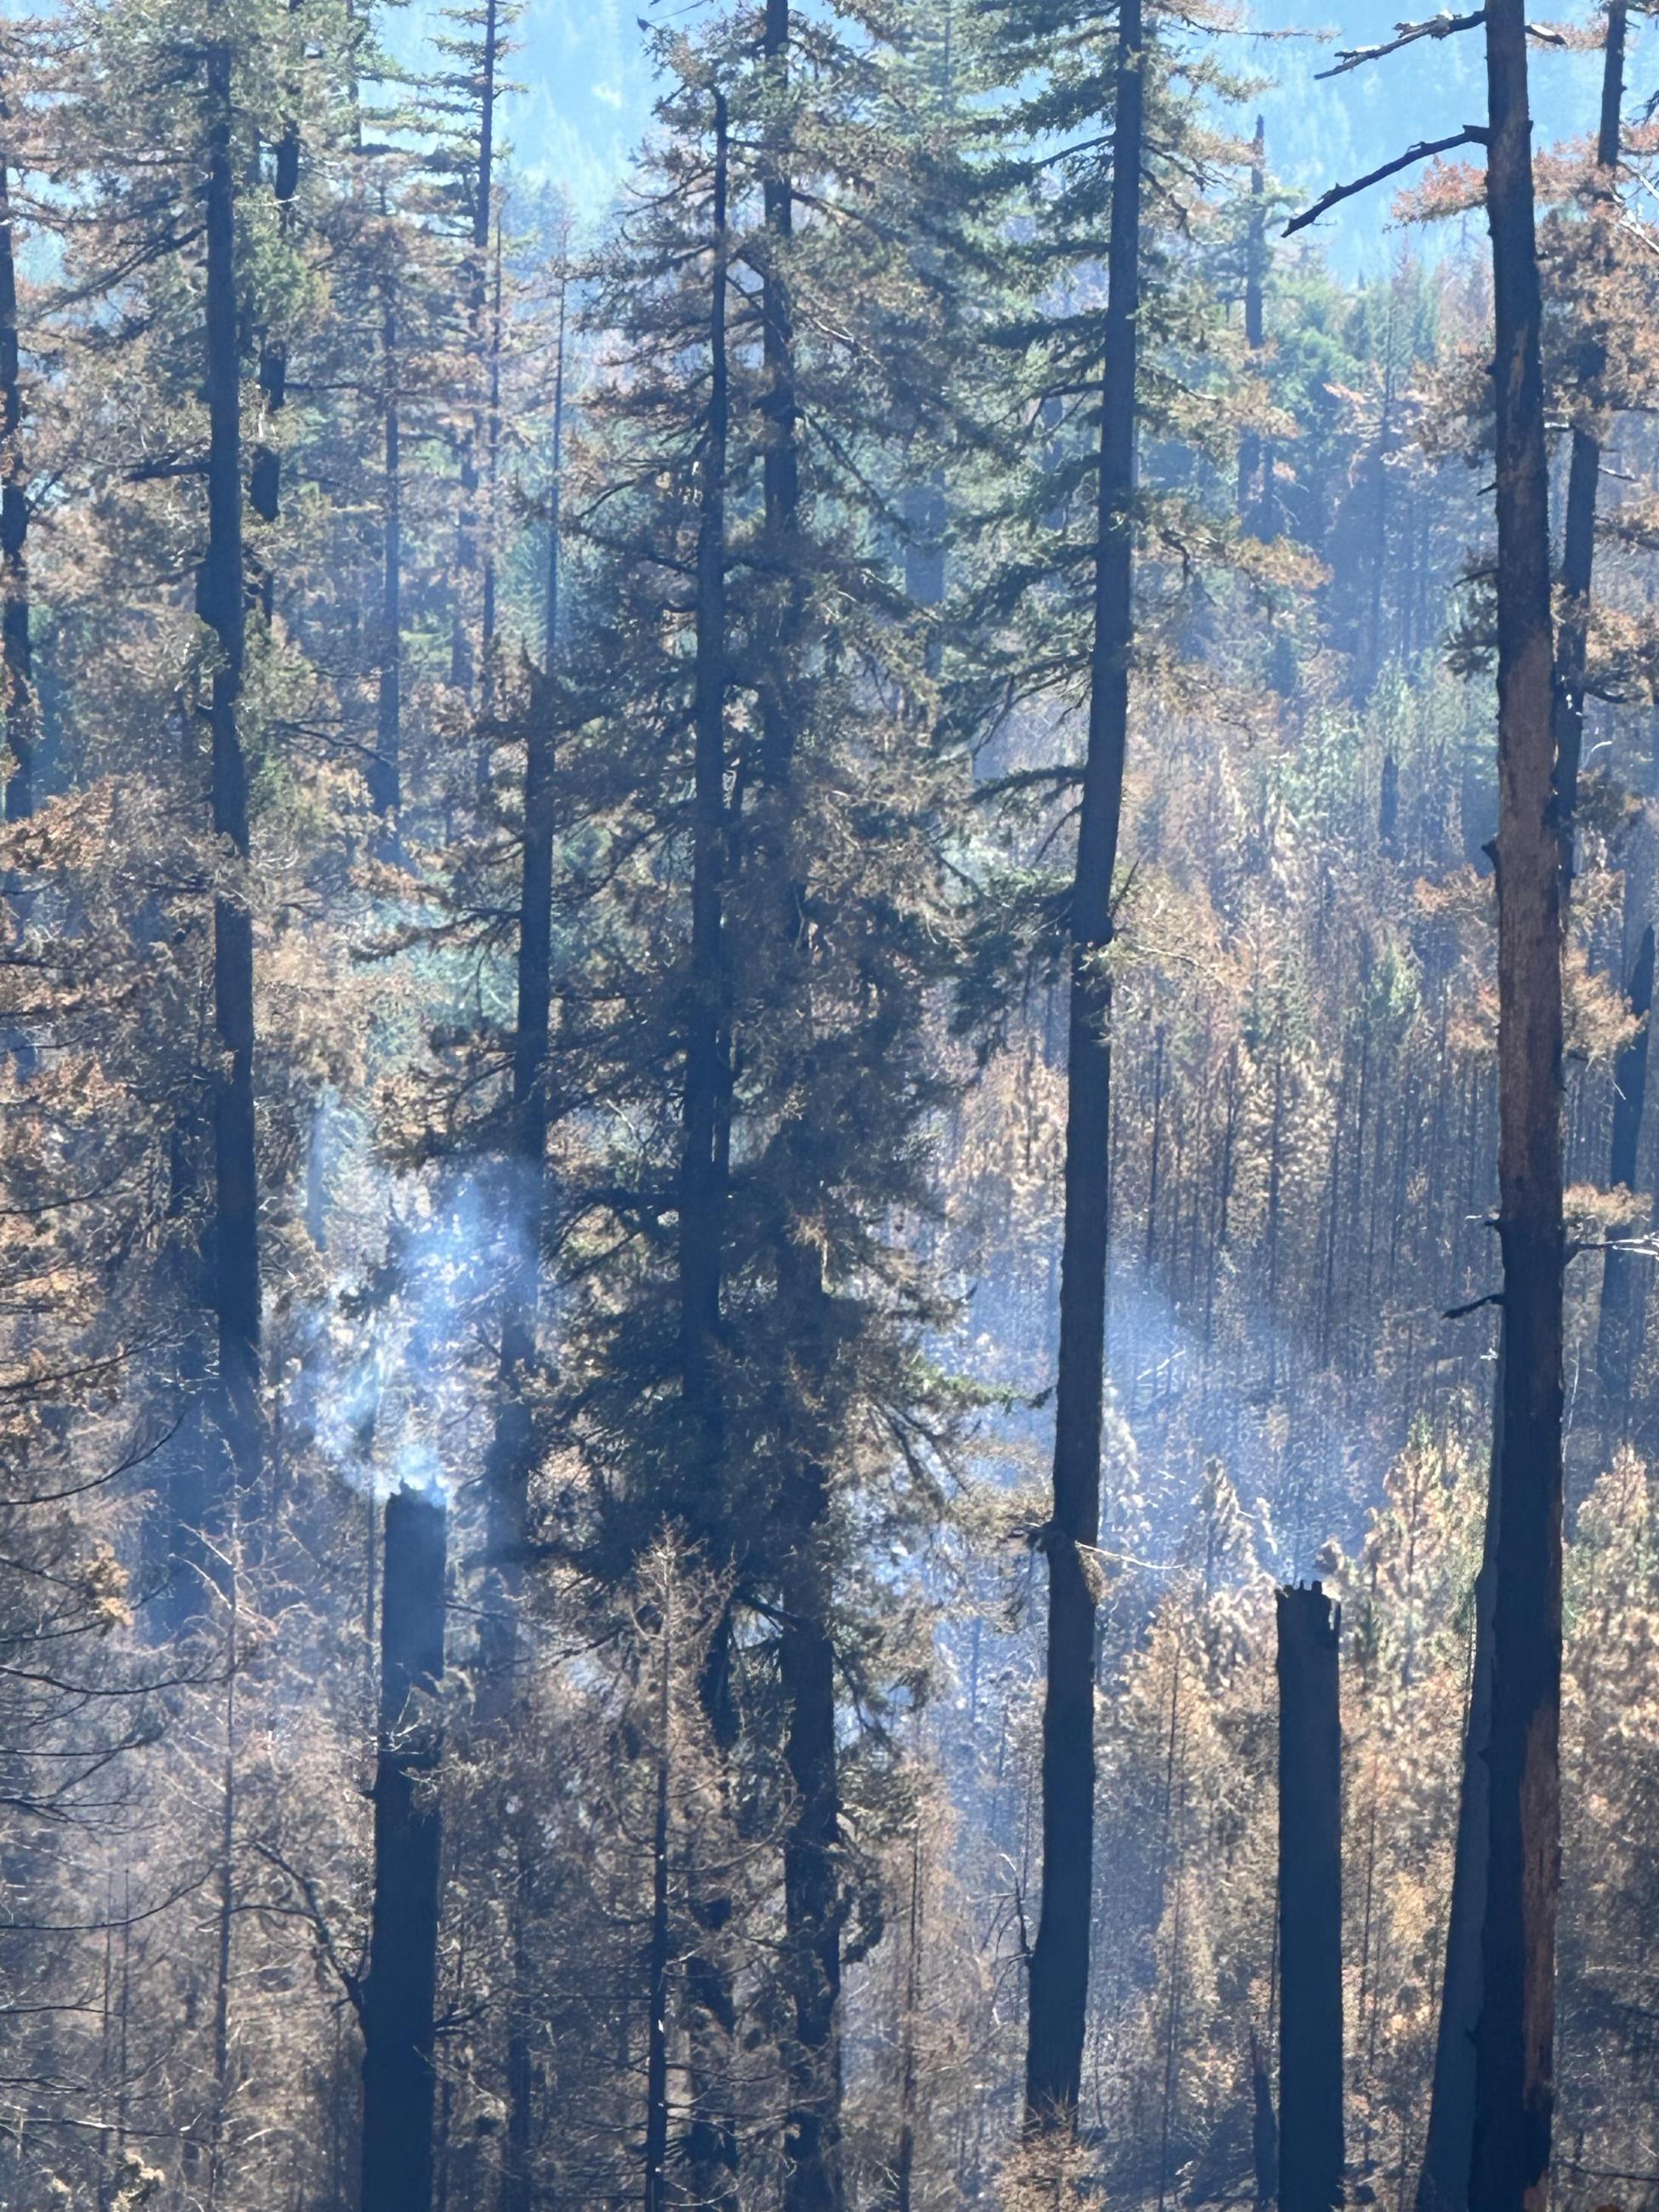 Smoke rises from burnt trees in a smoky forest